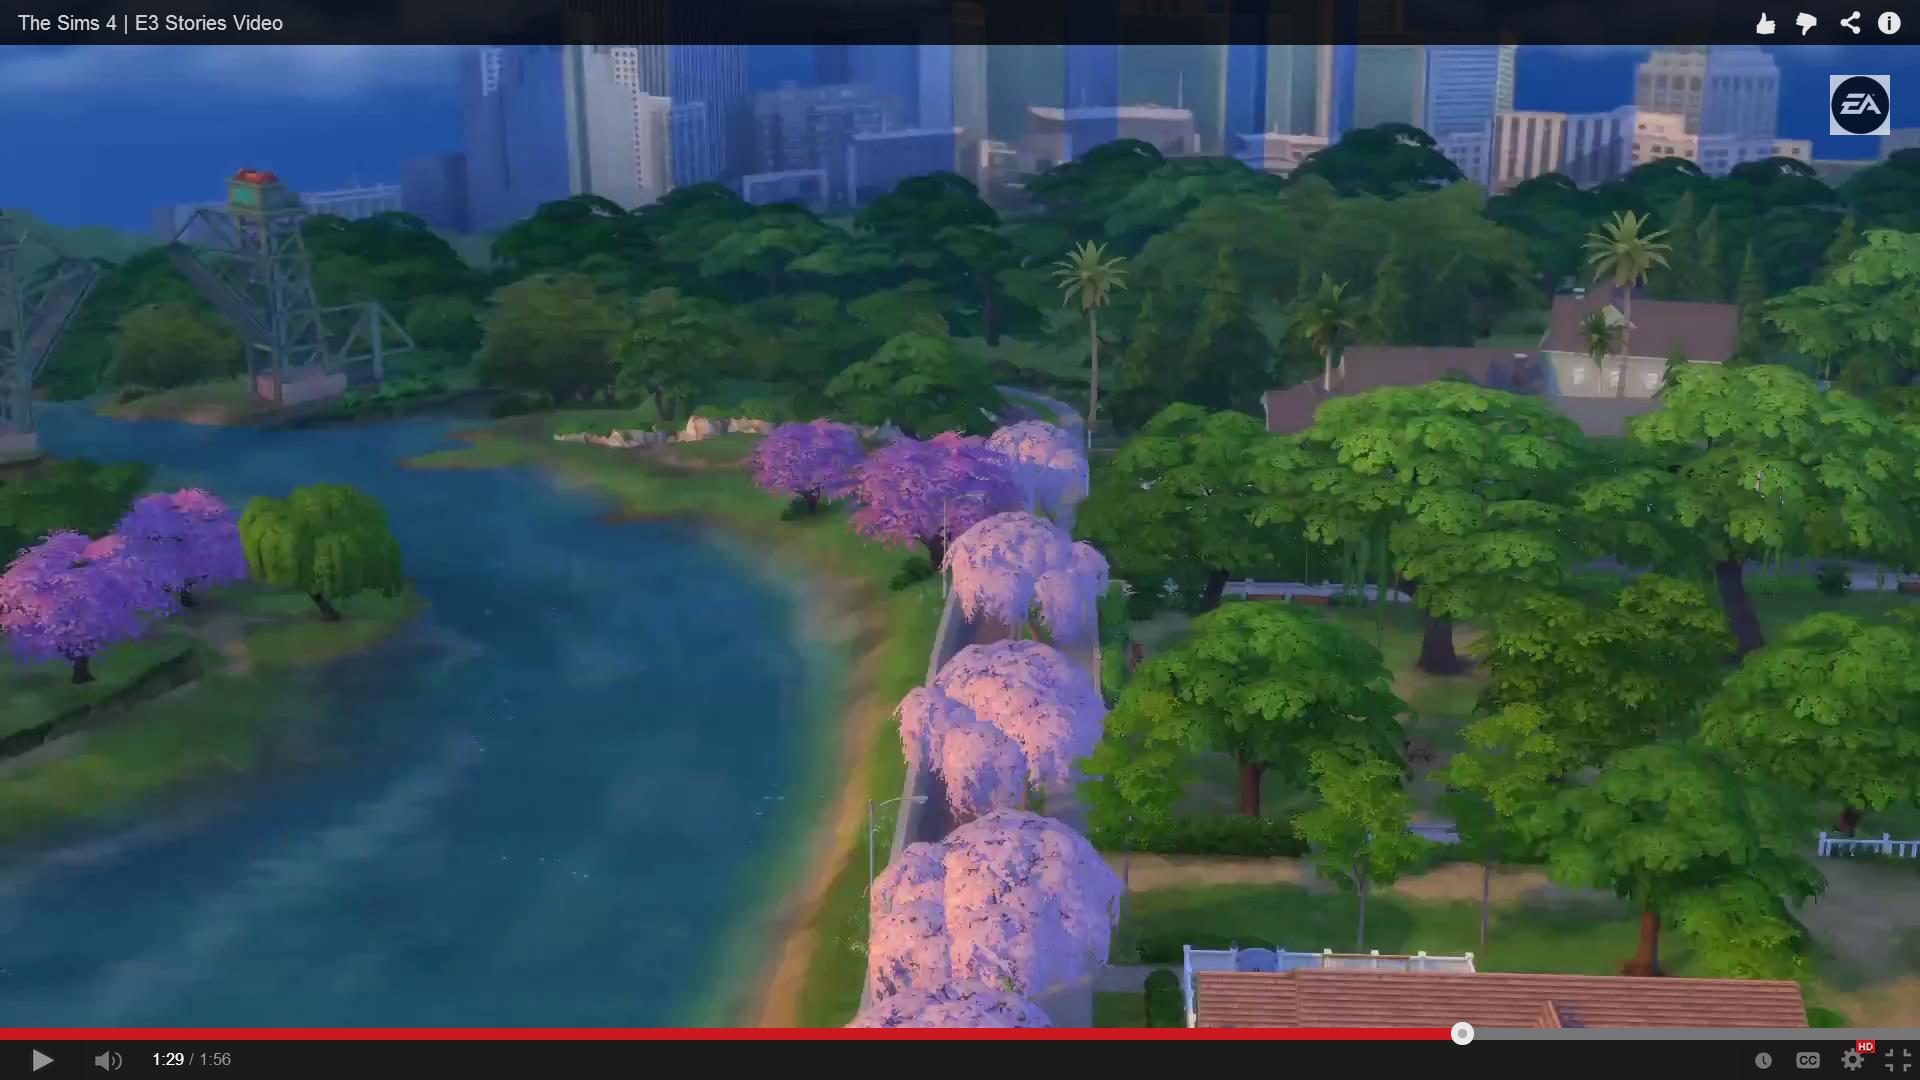 The City In Background Of Sims Videos Is Not A Visitable